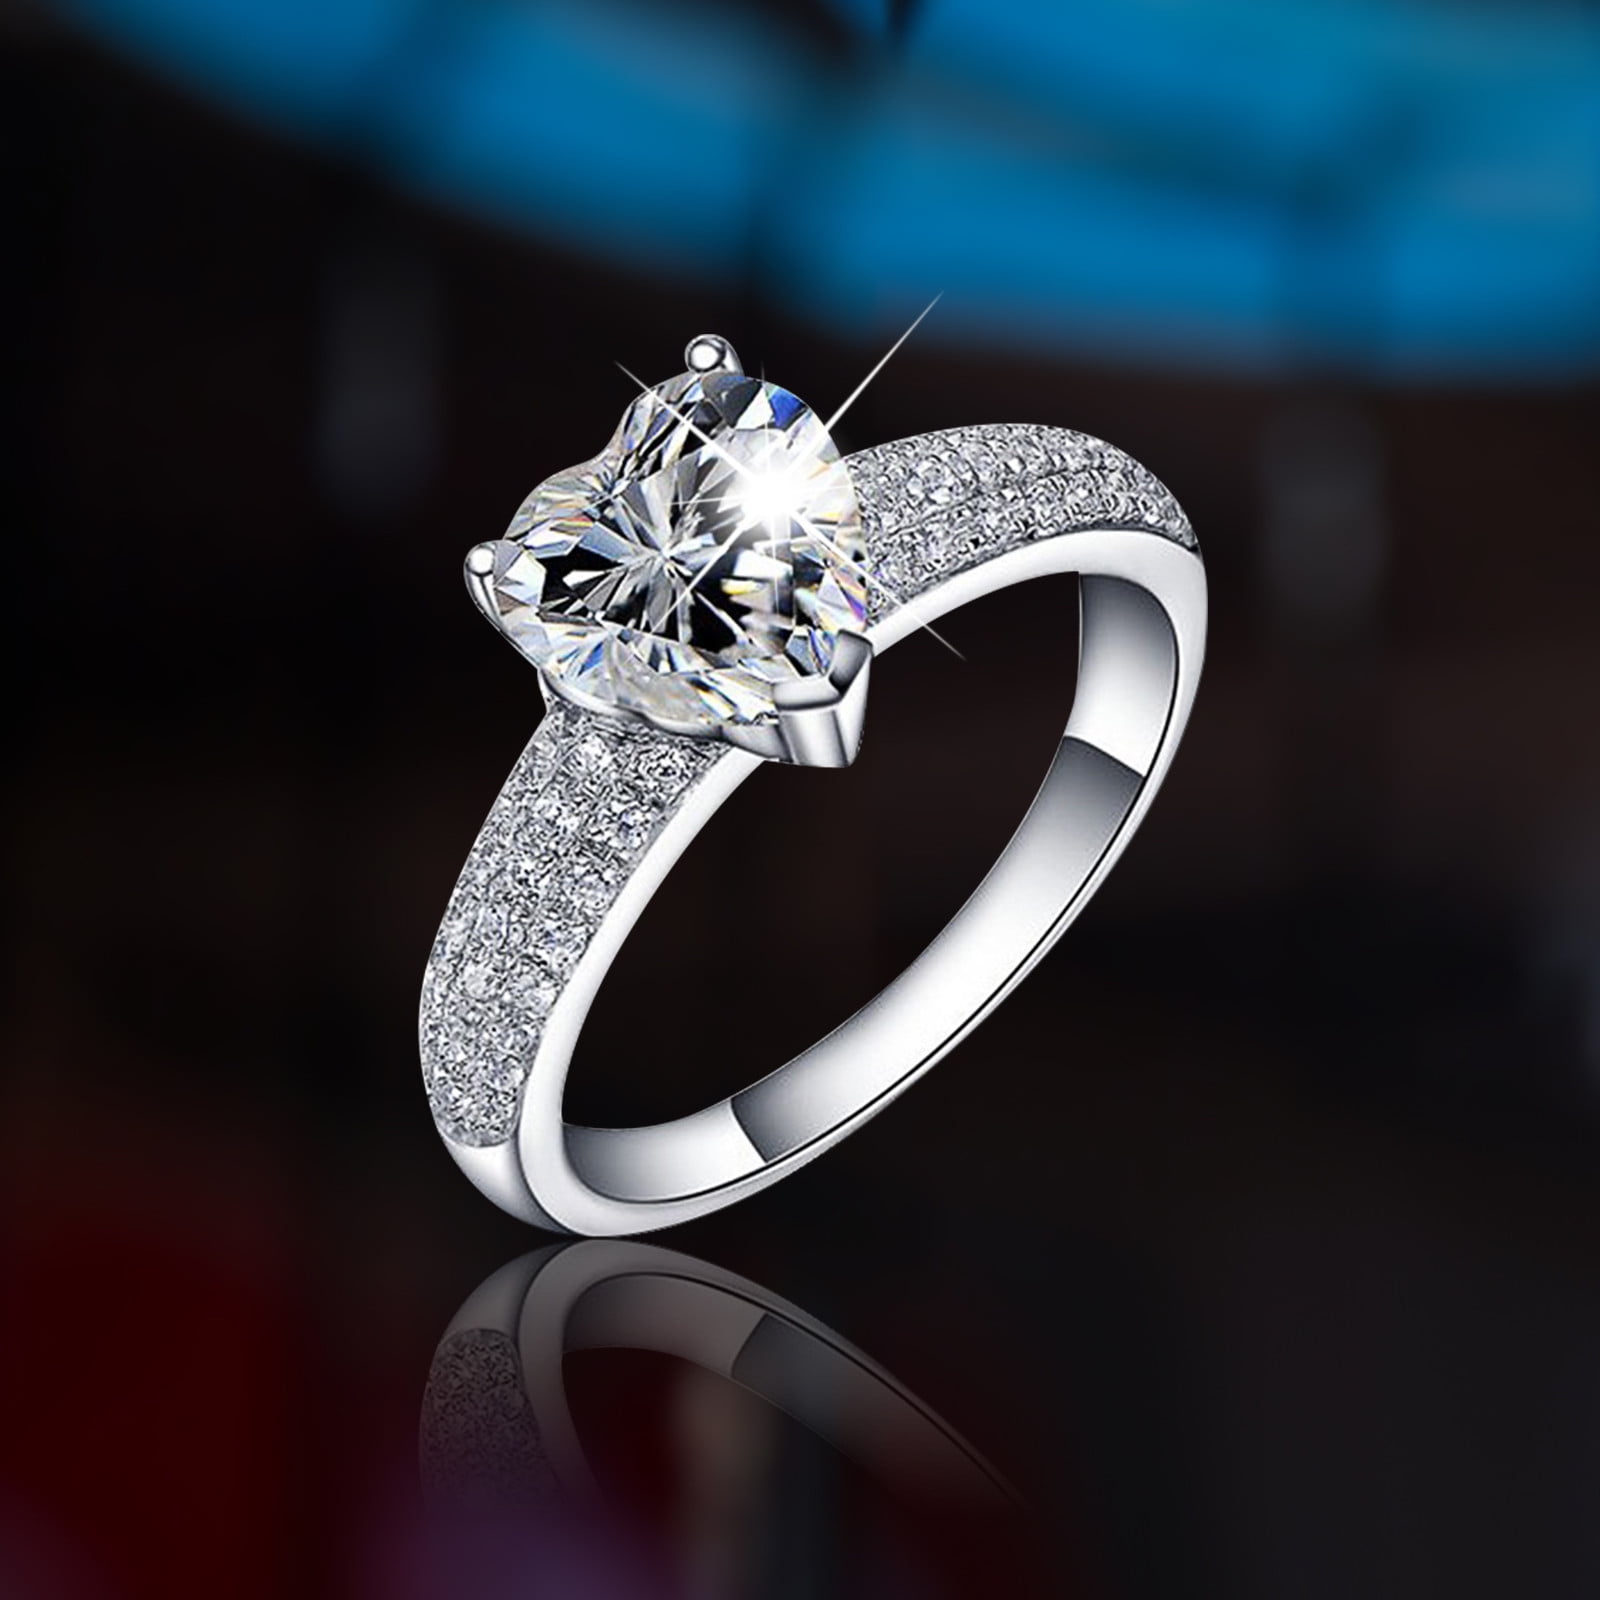 21 Beautiful Ring Boxes for Your Precious Wedding & Engagement Rings |  Expensive engagement rings, Large diamond engagement rings, Blue wedding  rings